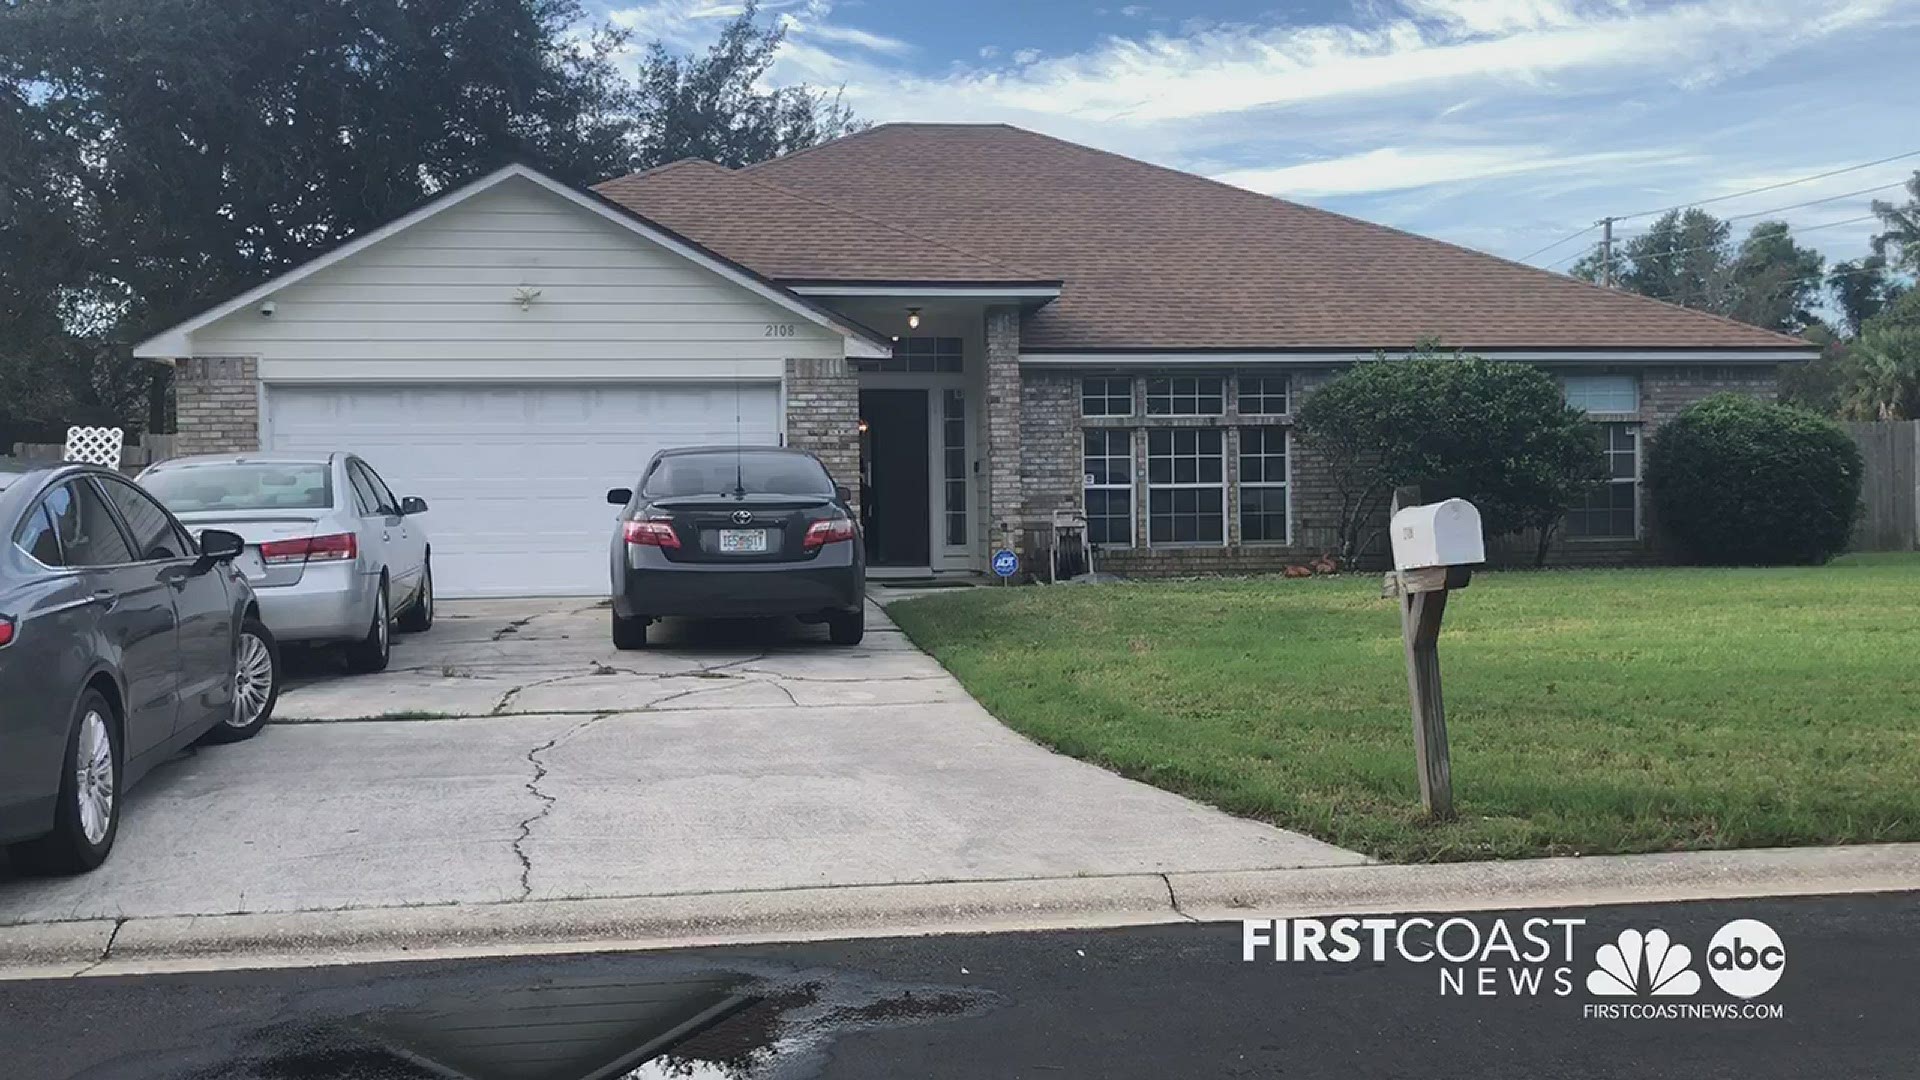 The Fernandina Beach Fire Department said they were called to take a gunshot victim to the hospital Monday. A neighbor says police have been there about 12 hours.